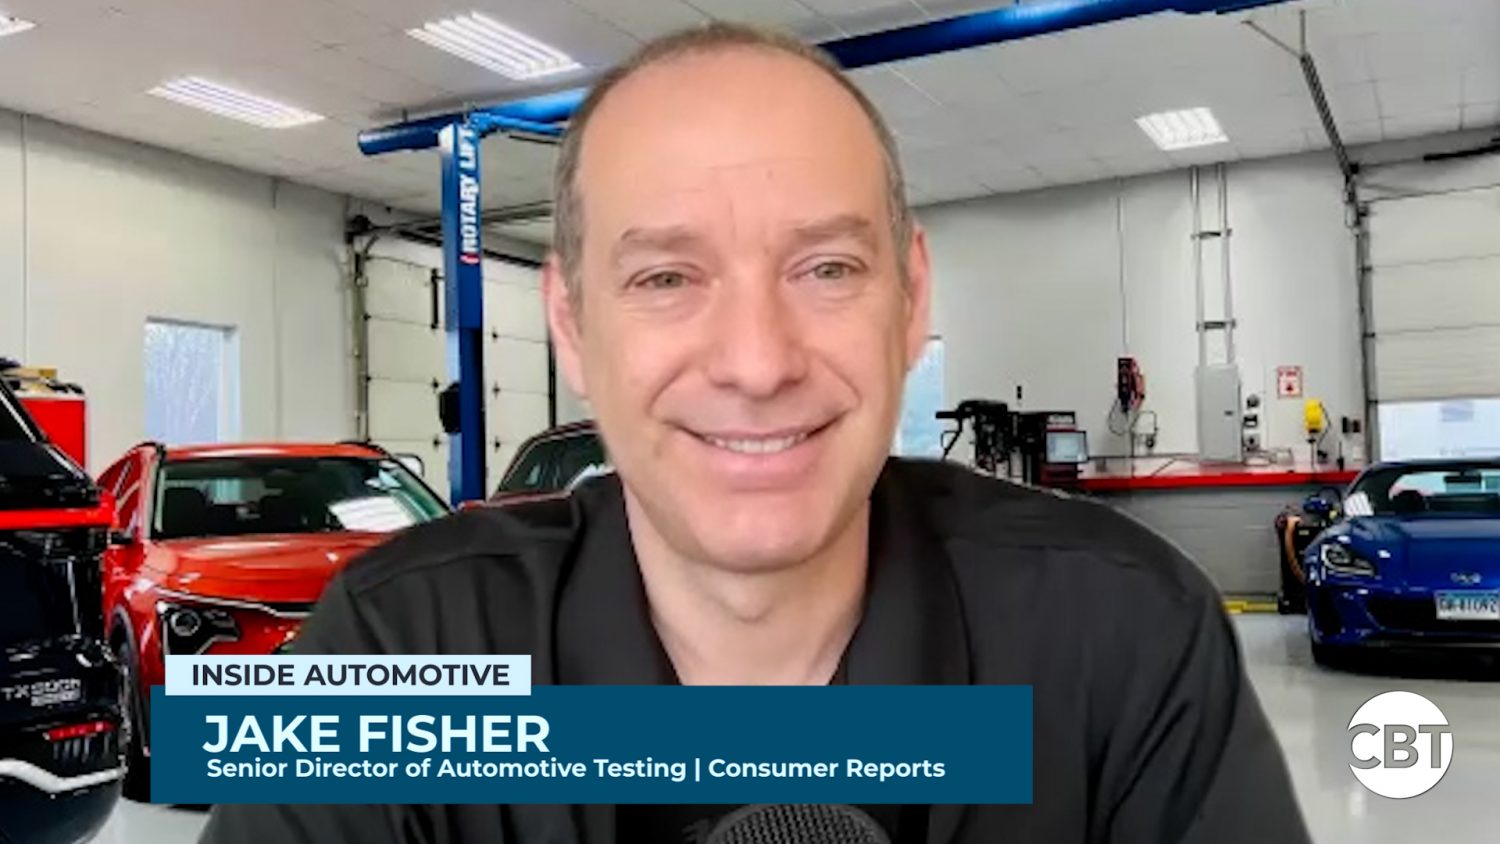 Jake Fisher joins Inside Automotive to discuss how product evaluation platform Consumer Reports tests and rates hybrids and electric vehicles.